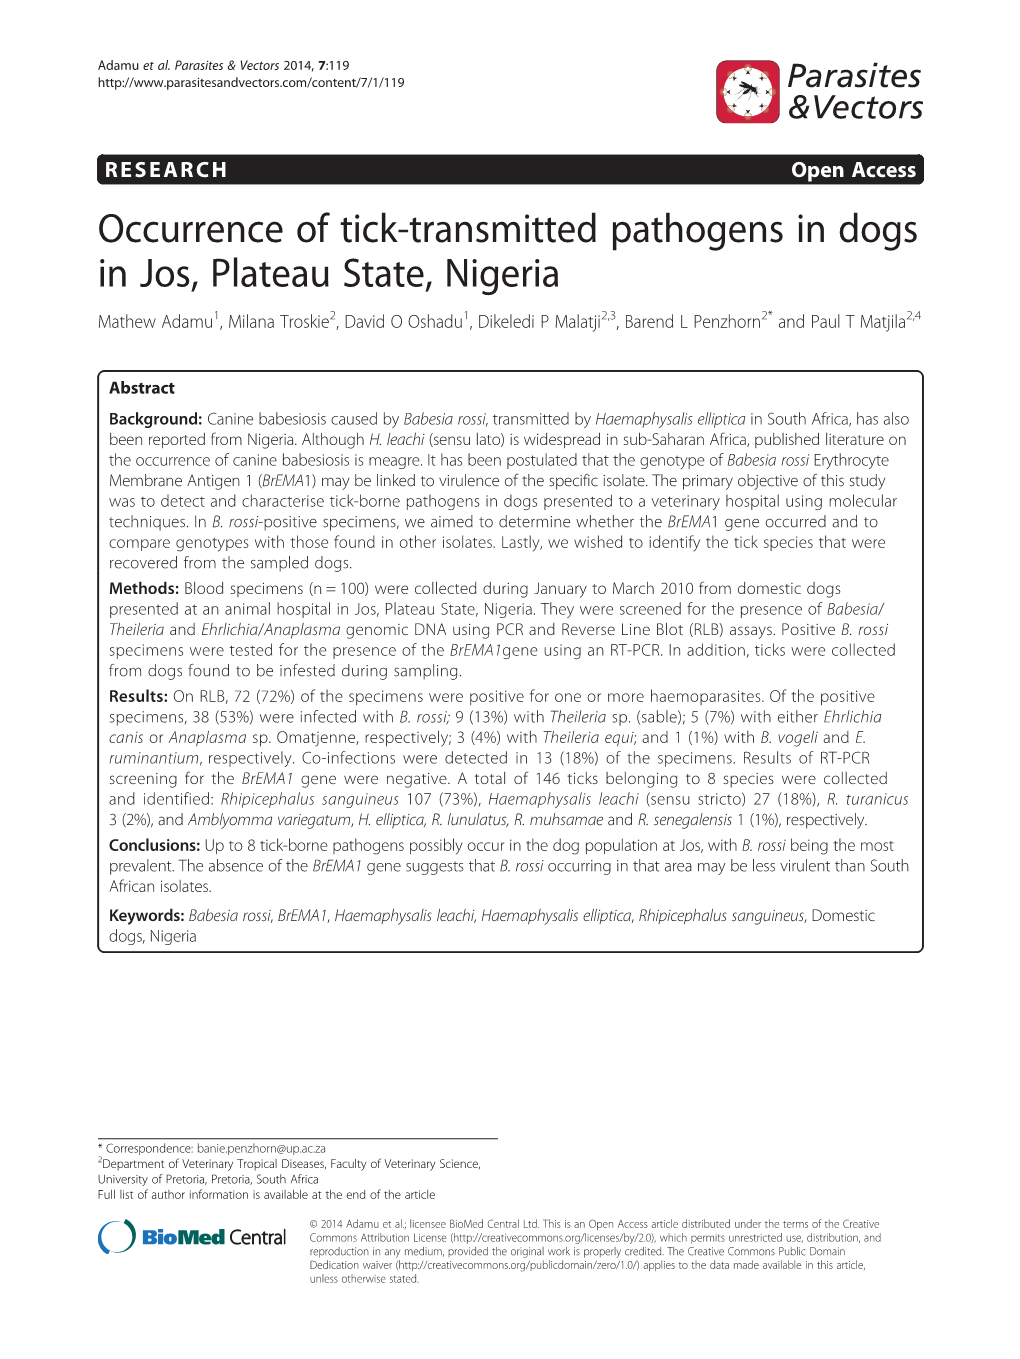 Occurrence of Tick-Transmitted Pathogens in Dogs in Jos, Plateau